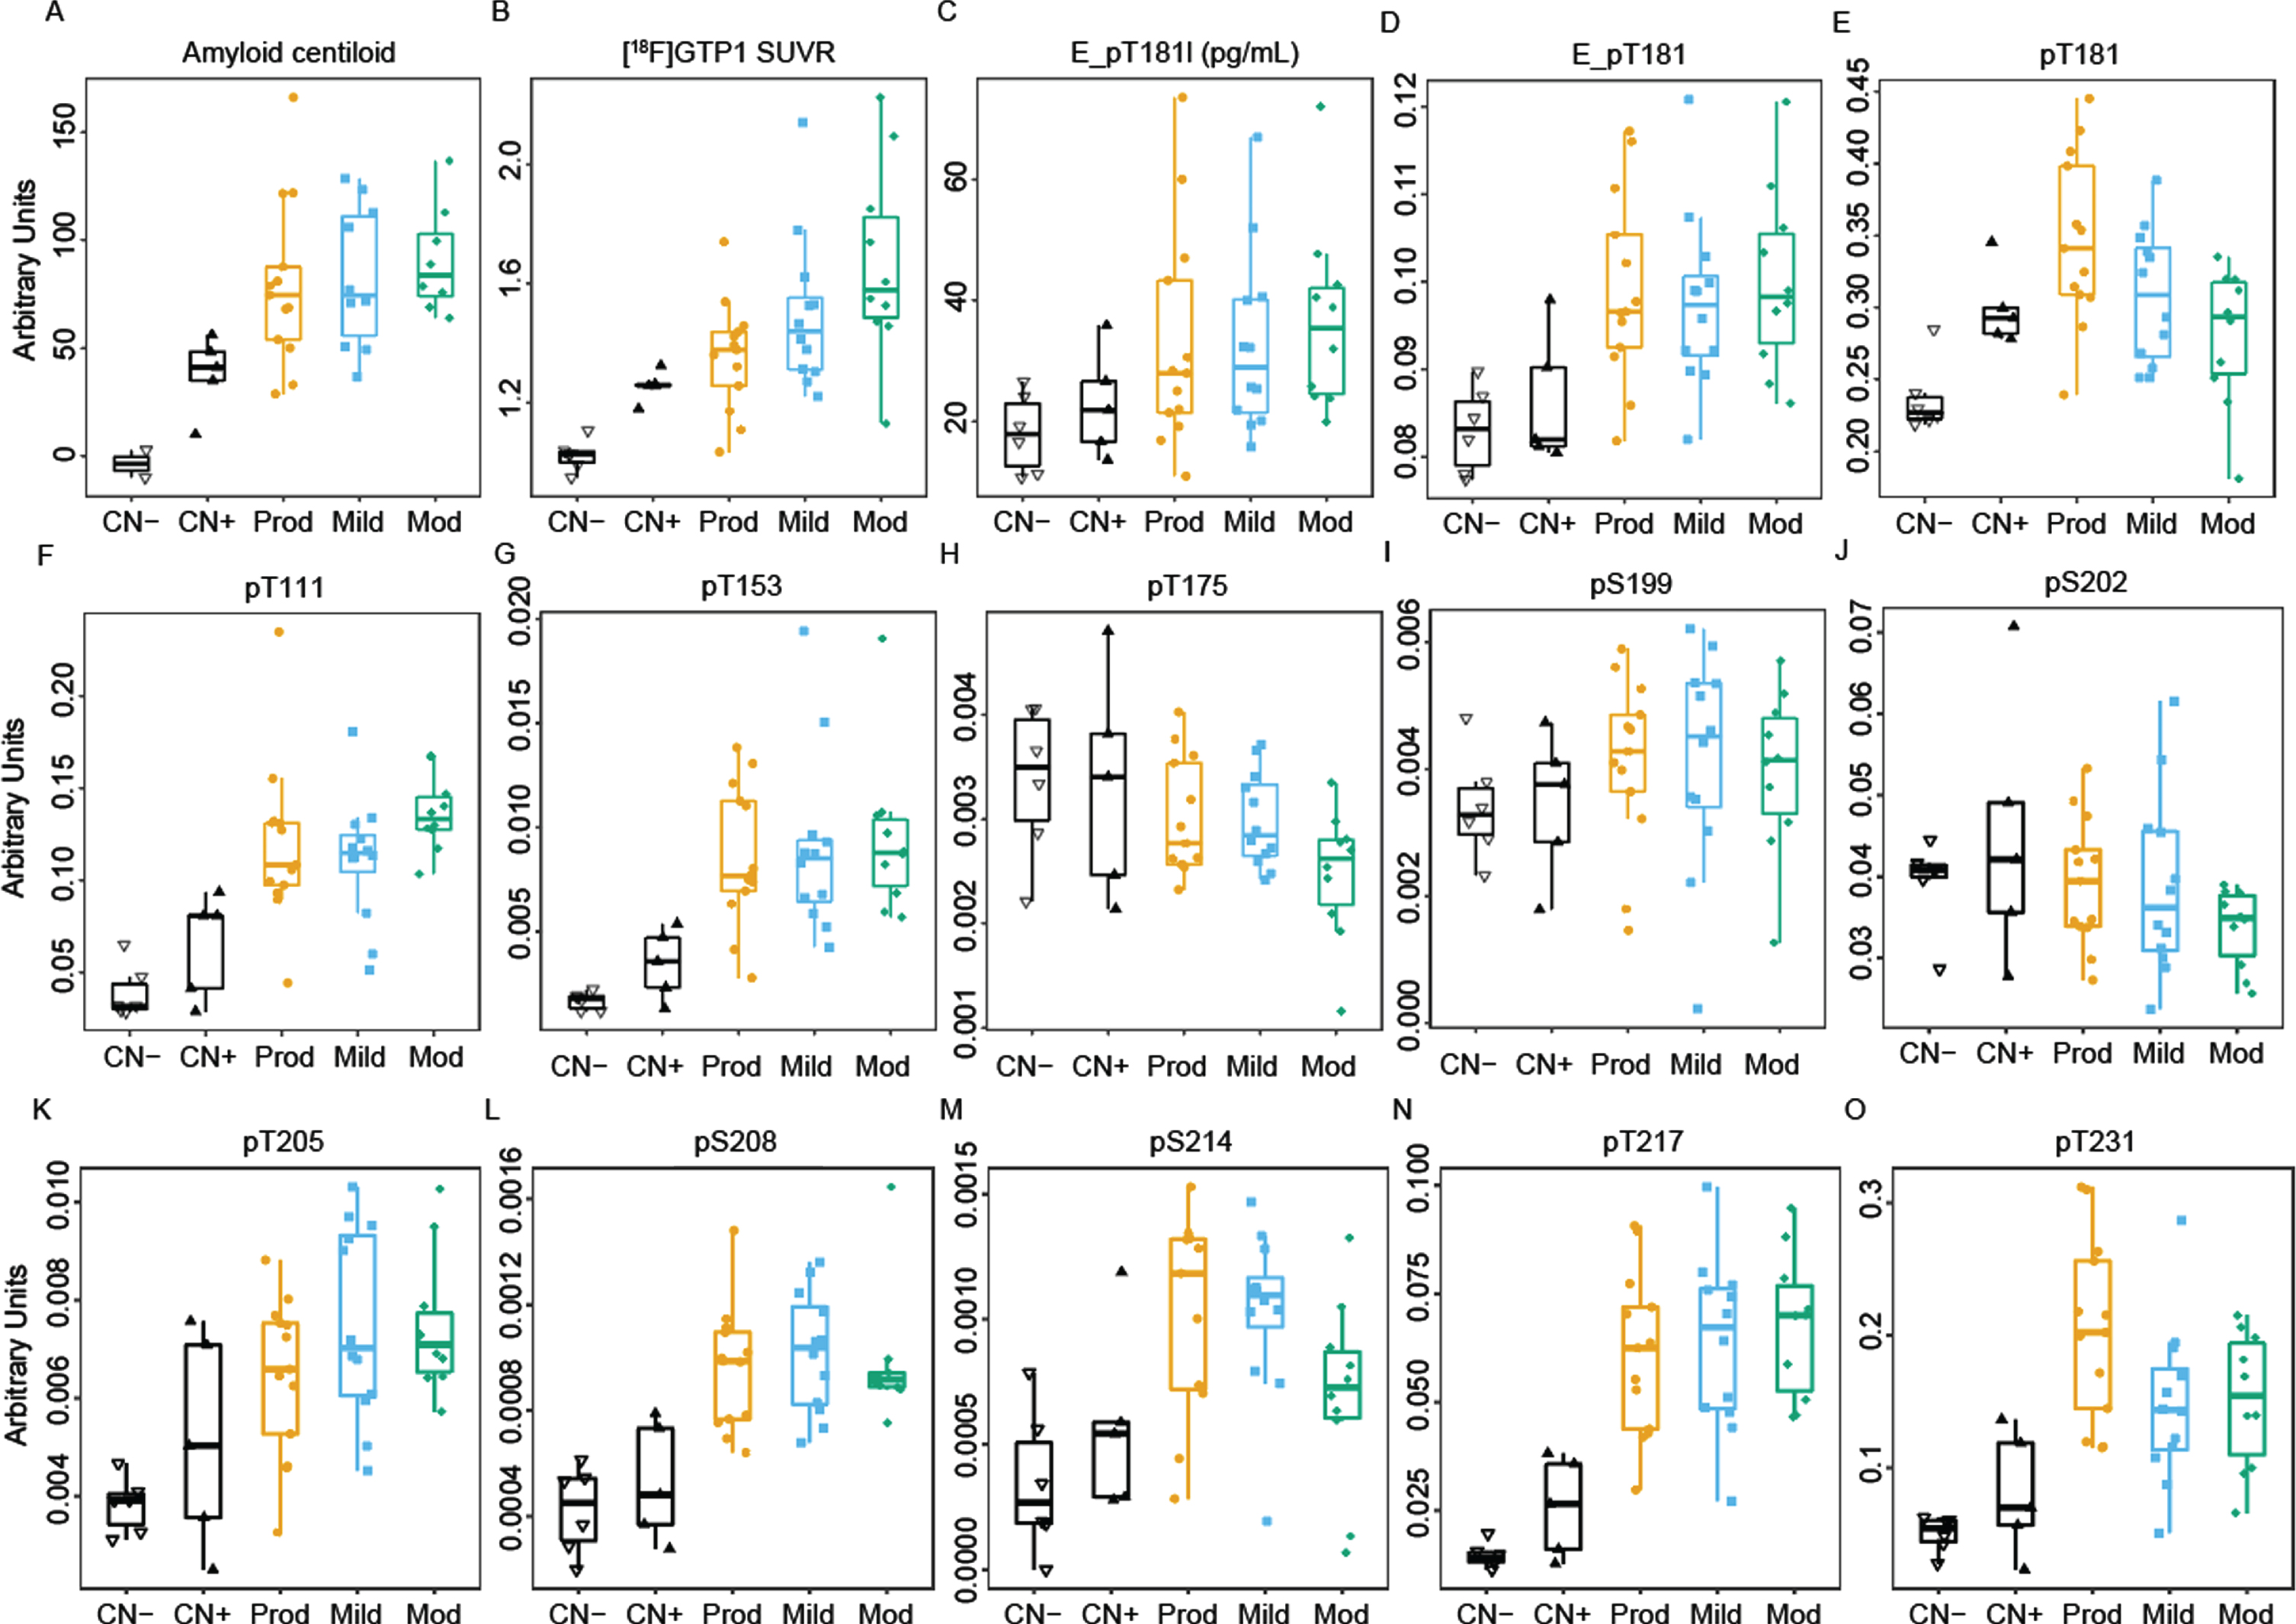 Cross-sectional boxplots from Cohort A comparing brain amyloid deposition (A) measured by FBP tracer (Amyloid centiloid), (B) [18F]GTP1 SUVR measuring brain tau aggregates, (C) Elecsys immunoassay measures of pTau181 level (E_pT181l), and (D) ratio of pTau181/tTau (E_pT181), (E) ratio of pTau181/uTau by MS, and (F–O) ratio of other phosphorylated residues by MS. CN-, cognitively normal, amyloid-low control; CN+, amyloid-high control; prod, prodromal; mod, moderate.